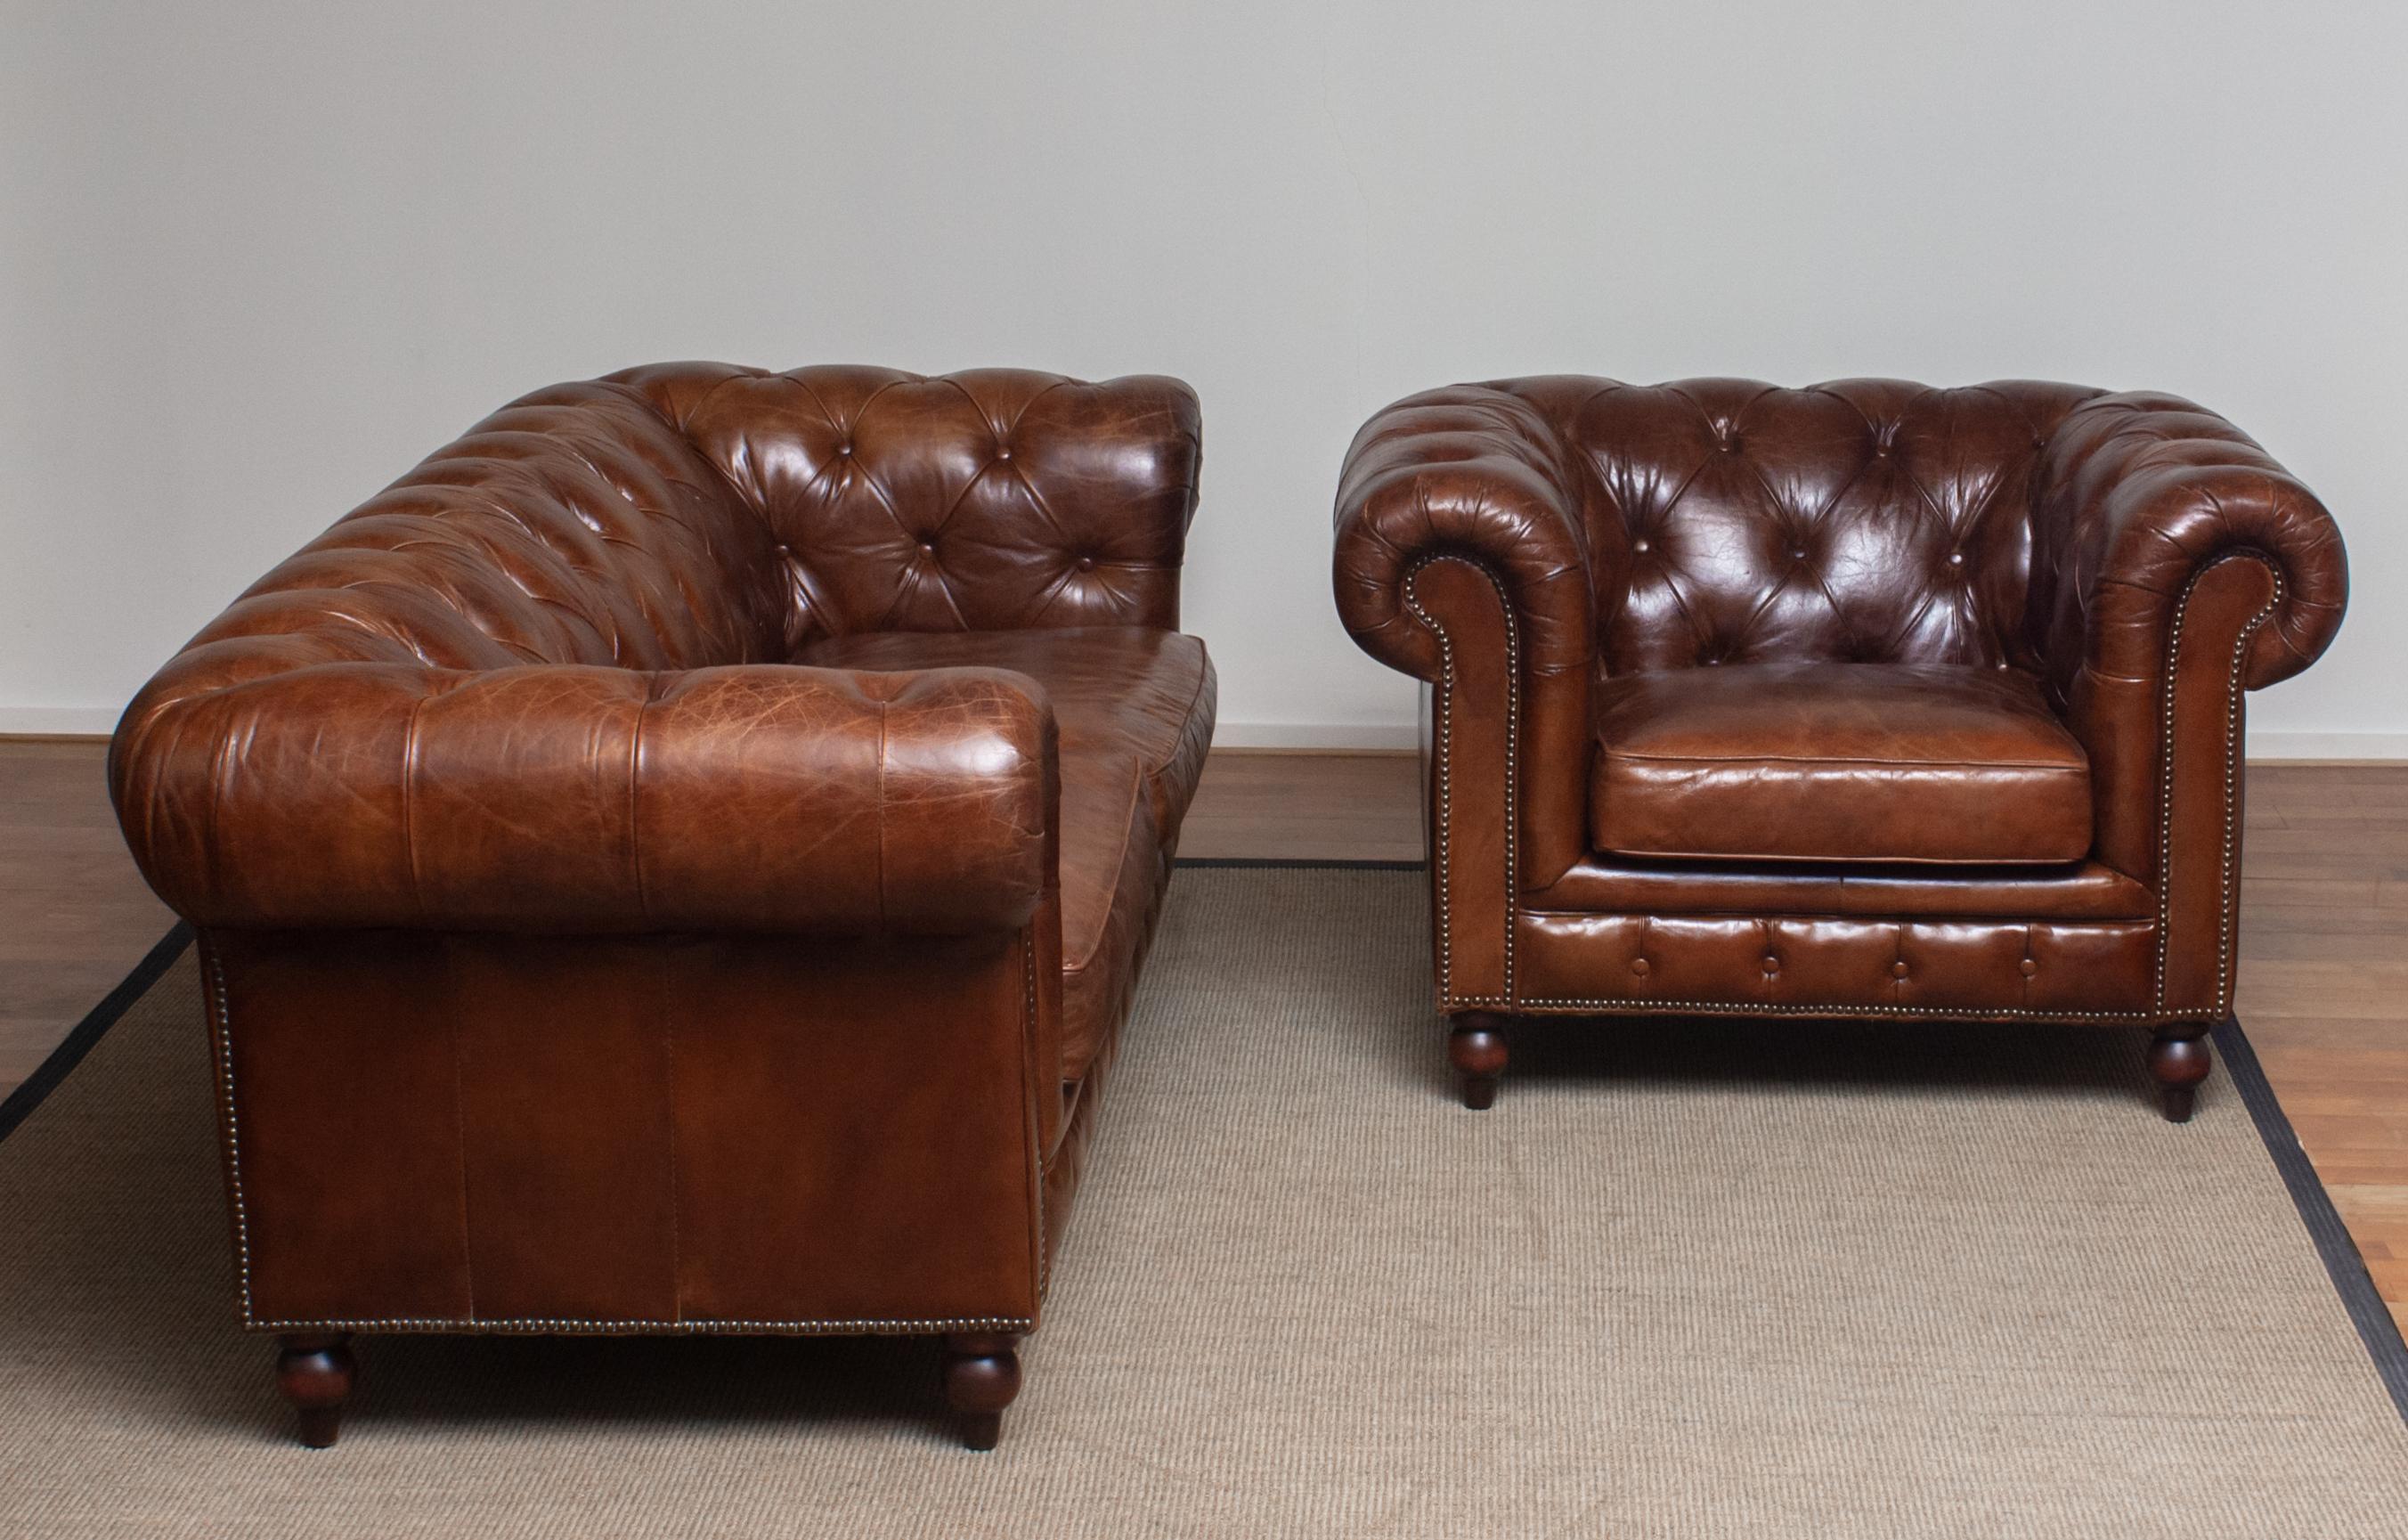 Tufted Brown Leather English Chesterfield Sofa from the 20th Century 13